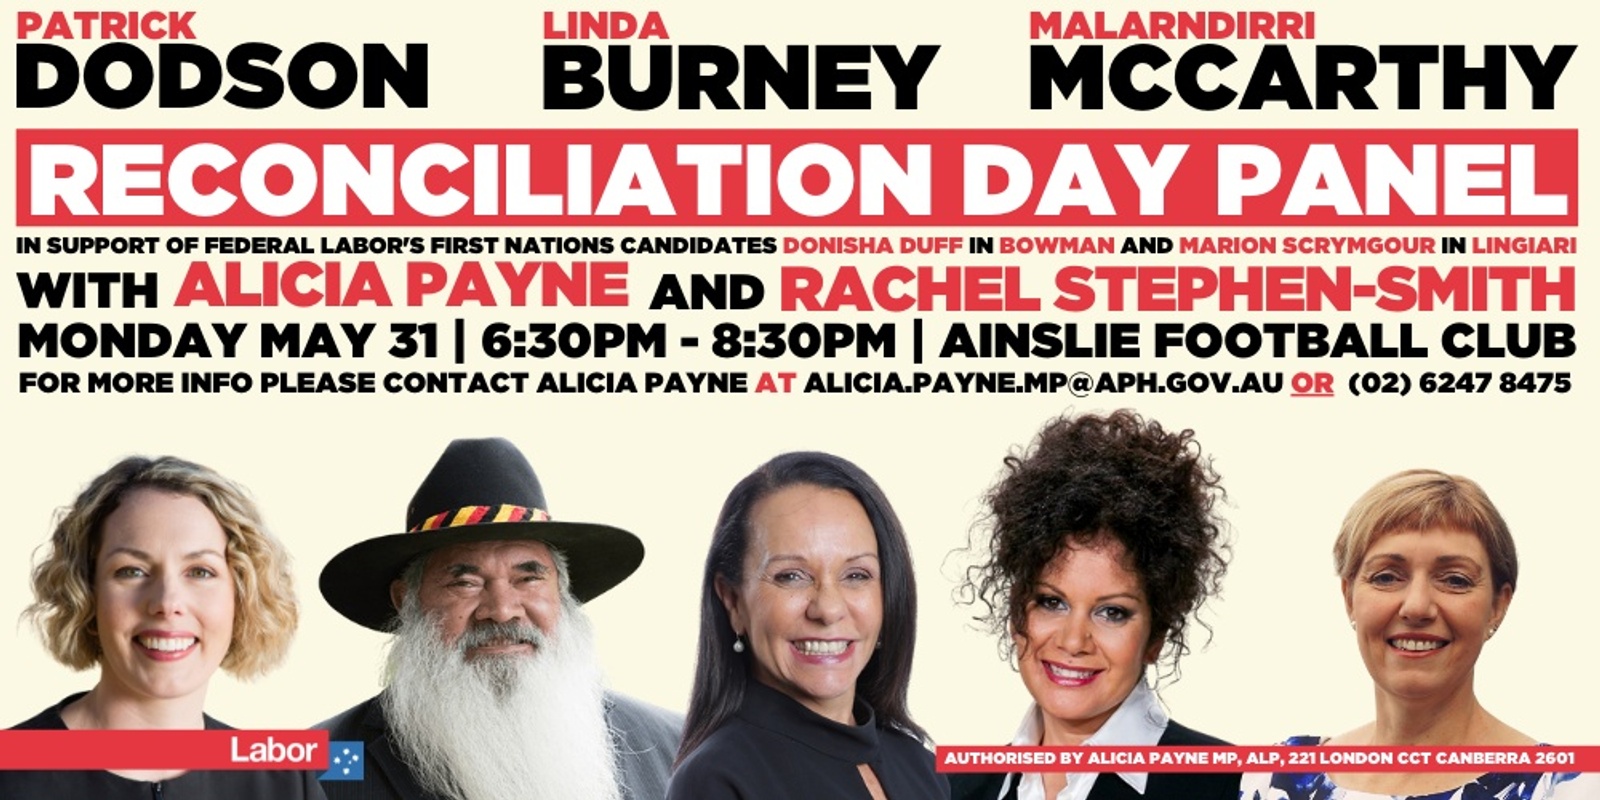 Banner image for Reconciliation Day Panel with Patrick Dodson, Linda Burney and Malarndirri McCarthy